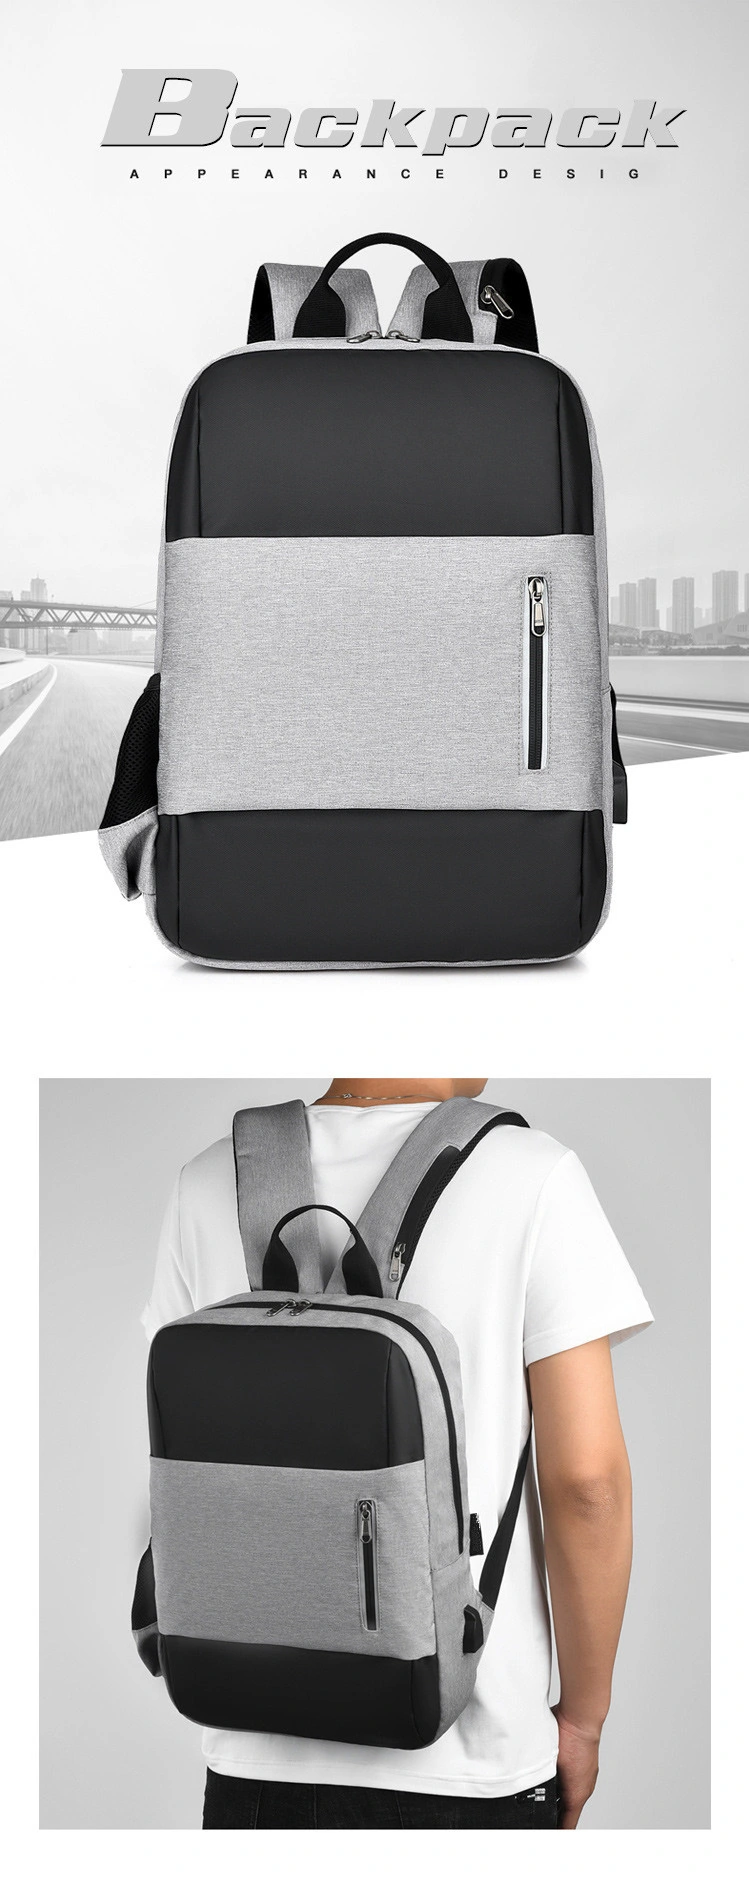 Smart Anti Thief Trolley Travel Backpack with Laptop Compartment Waterproof Business Bag USB Charging Laptop Backpack 